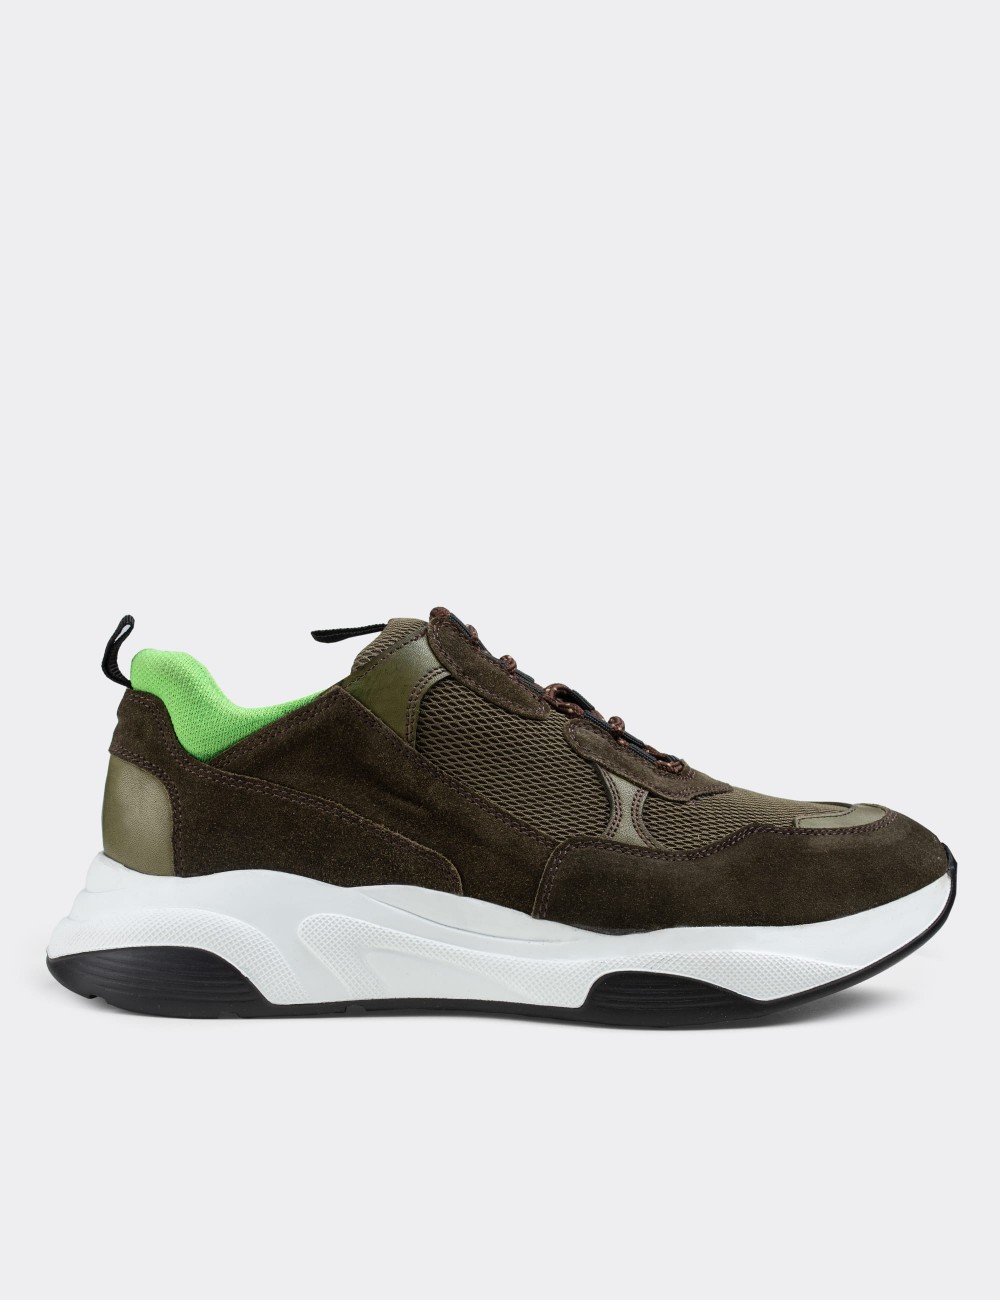 Green Suede Leather Sneakers - 01724MYSLE02